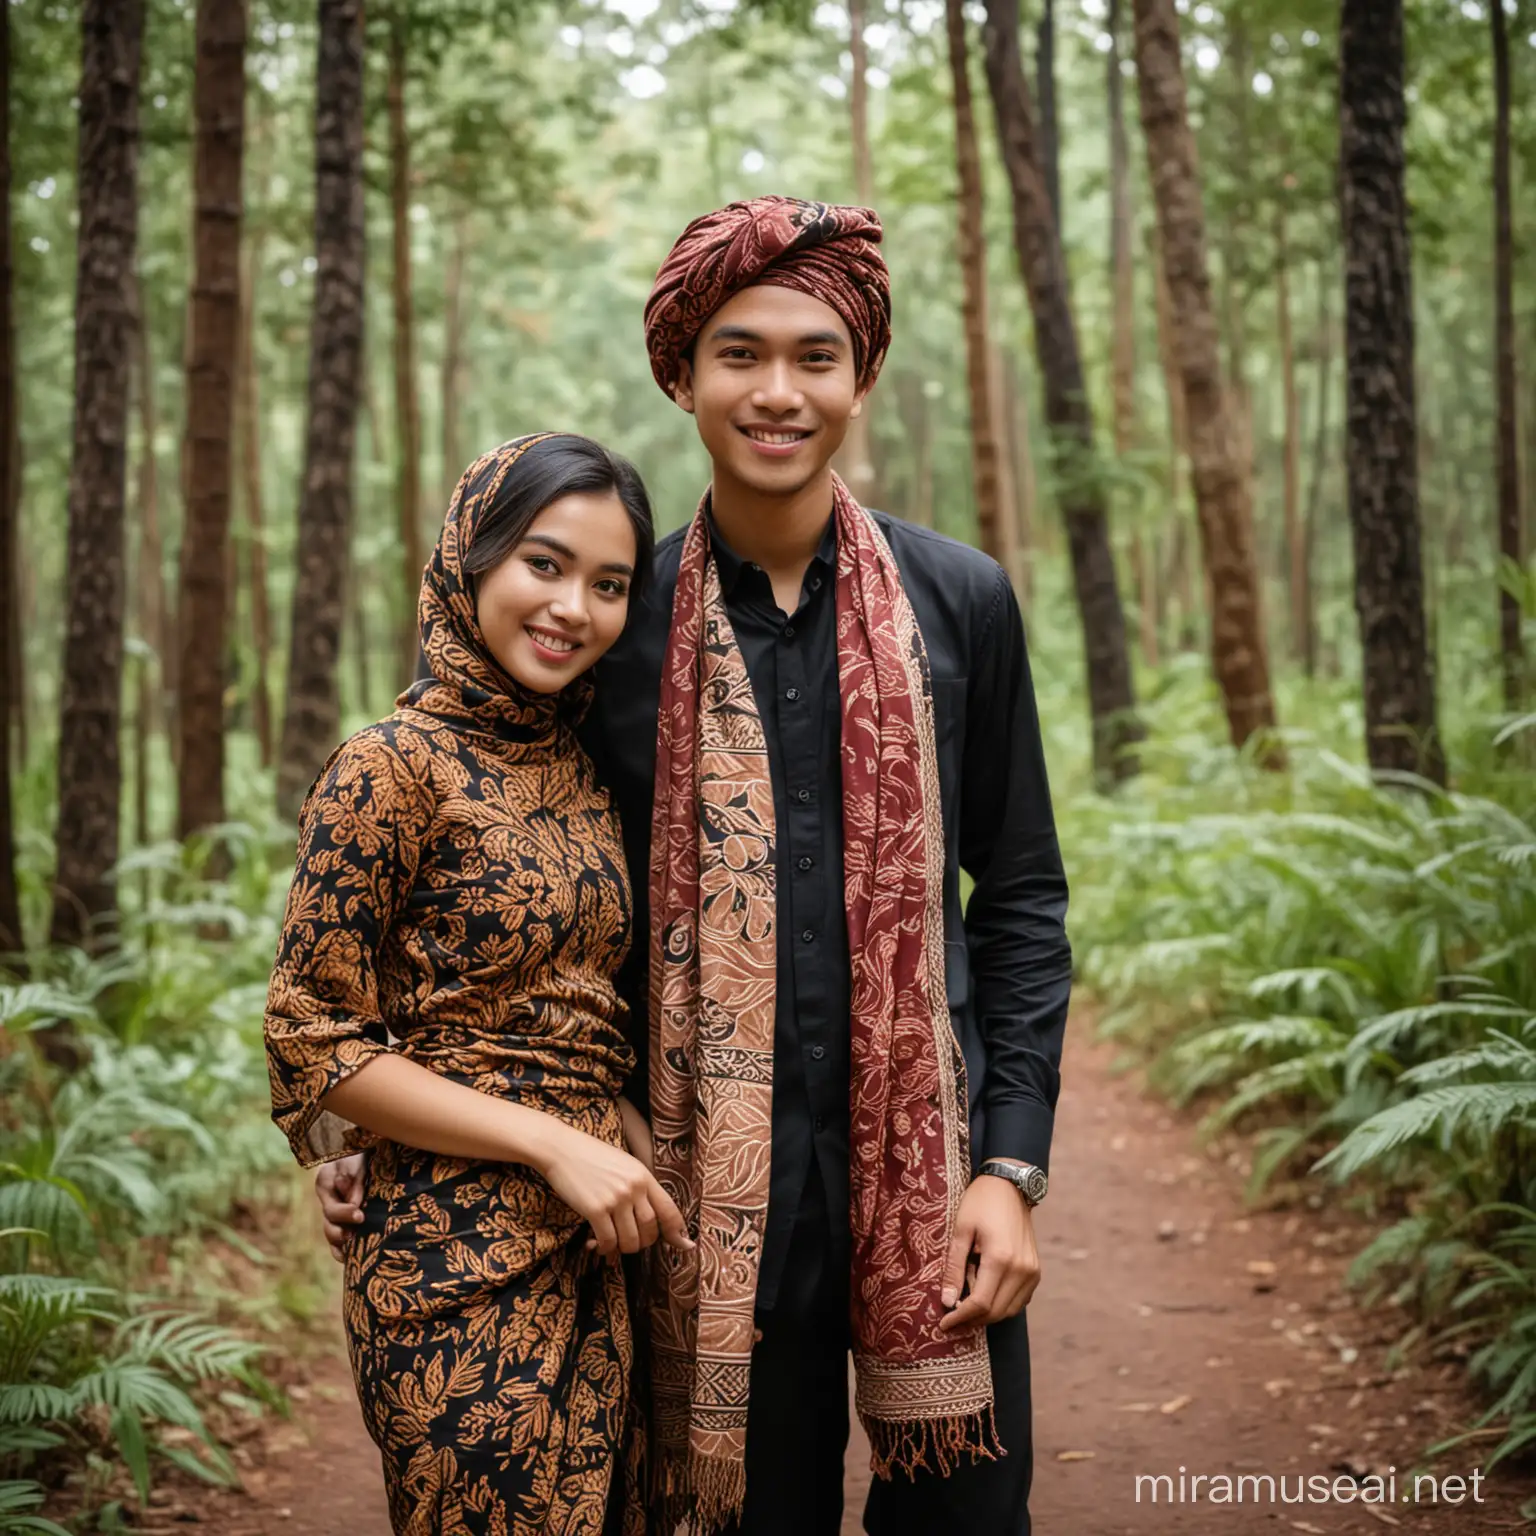 pre-wedding photo of a 19 year old Indonesian woman and man, the man is wearing batik and black pants, the woman is wearing very beautiful make-up, wearing natural slightly reddish lipstick, wearing batik, wearing a headscarf and wearing a sarong, posing as if walking, and smiling , Pine forest background.